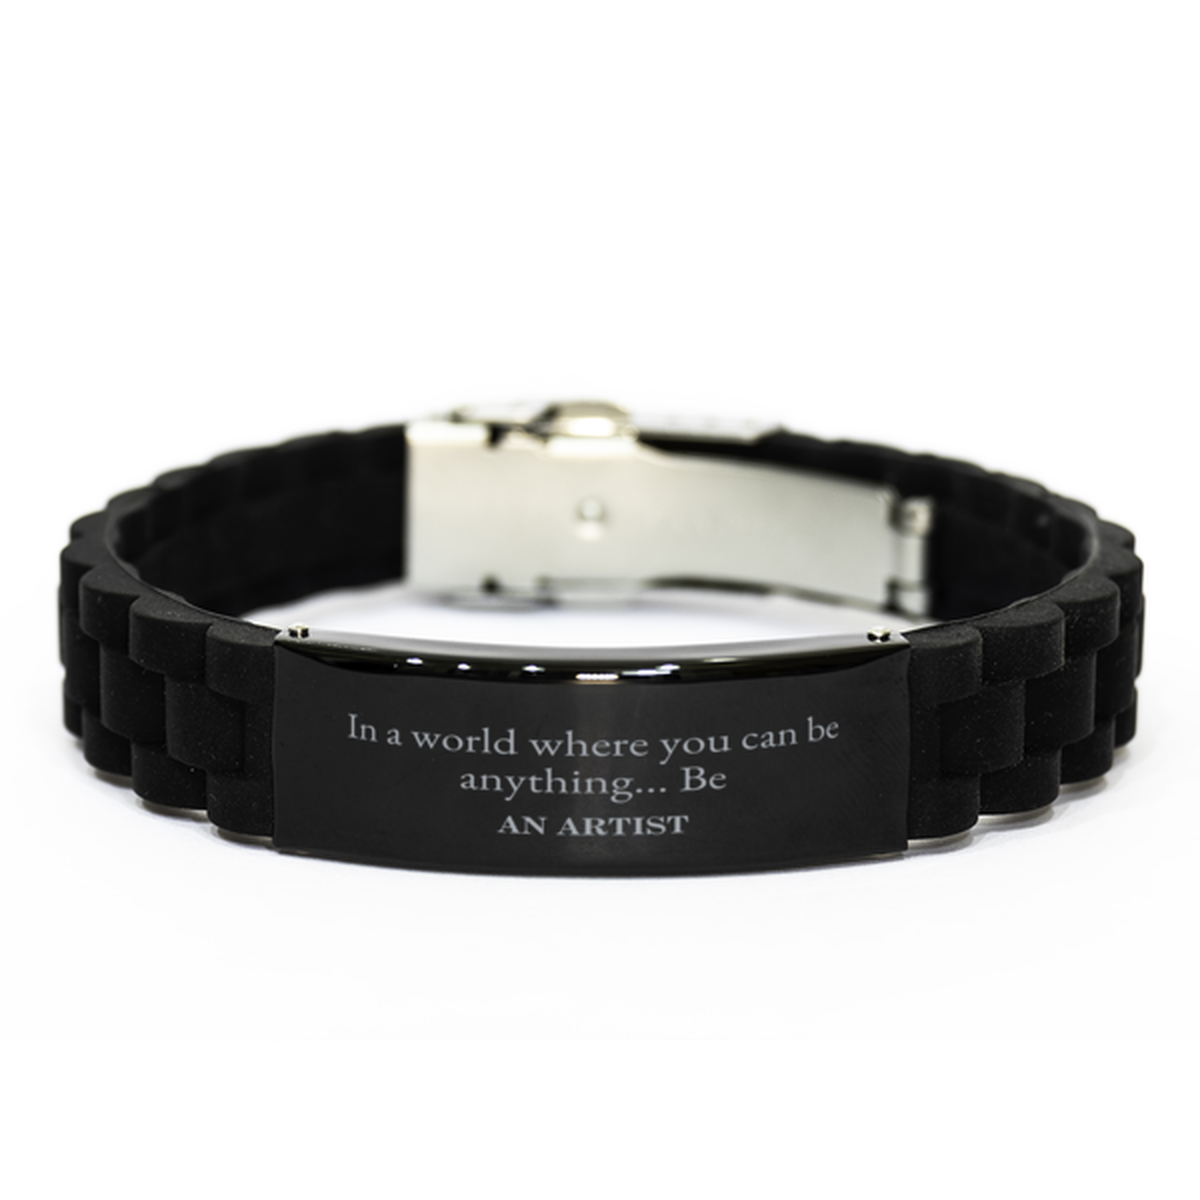 Gifts for Artist, In a world where you can be anything, Appreciation Birthday Black Glidelock Clasp Bracelet for Men, Women, Friends, Coworkers